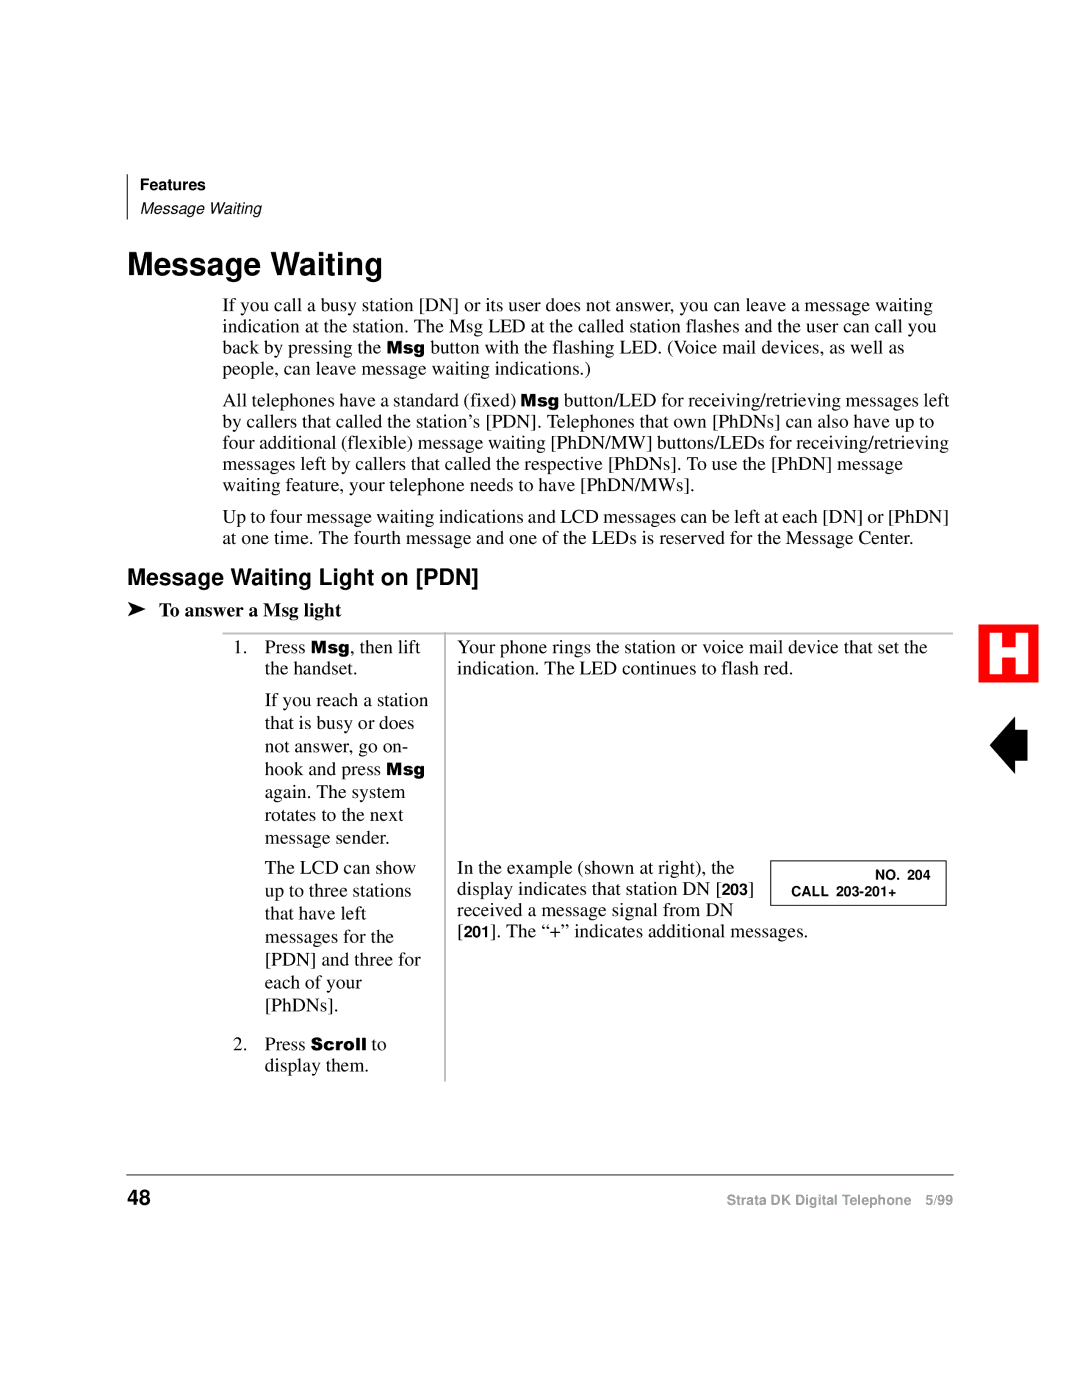 Toshiba Digital Telephone manual Message Waiting Light on PDN, To answer a Msg light 